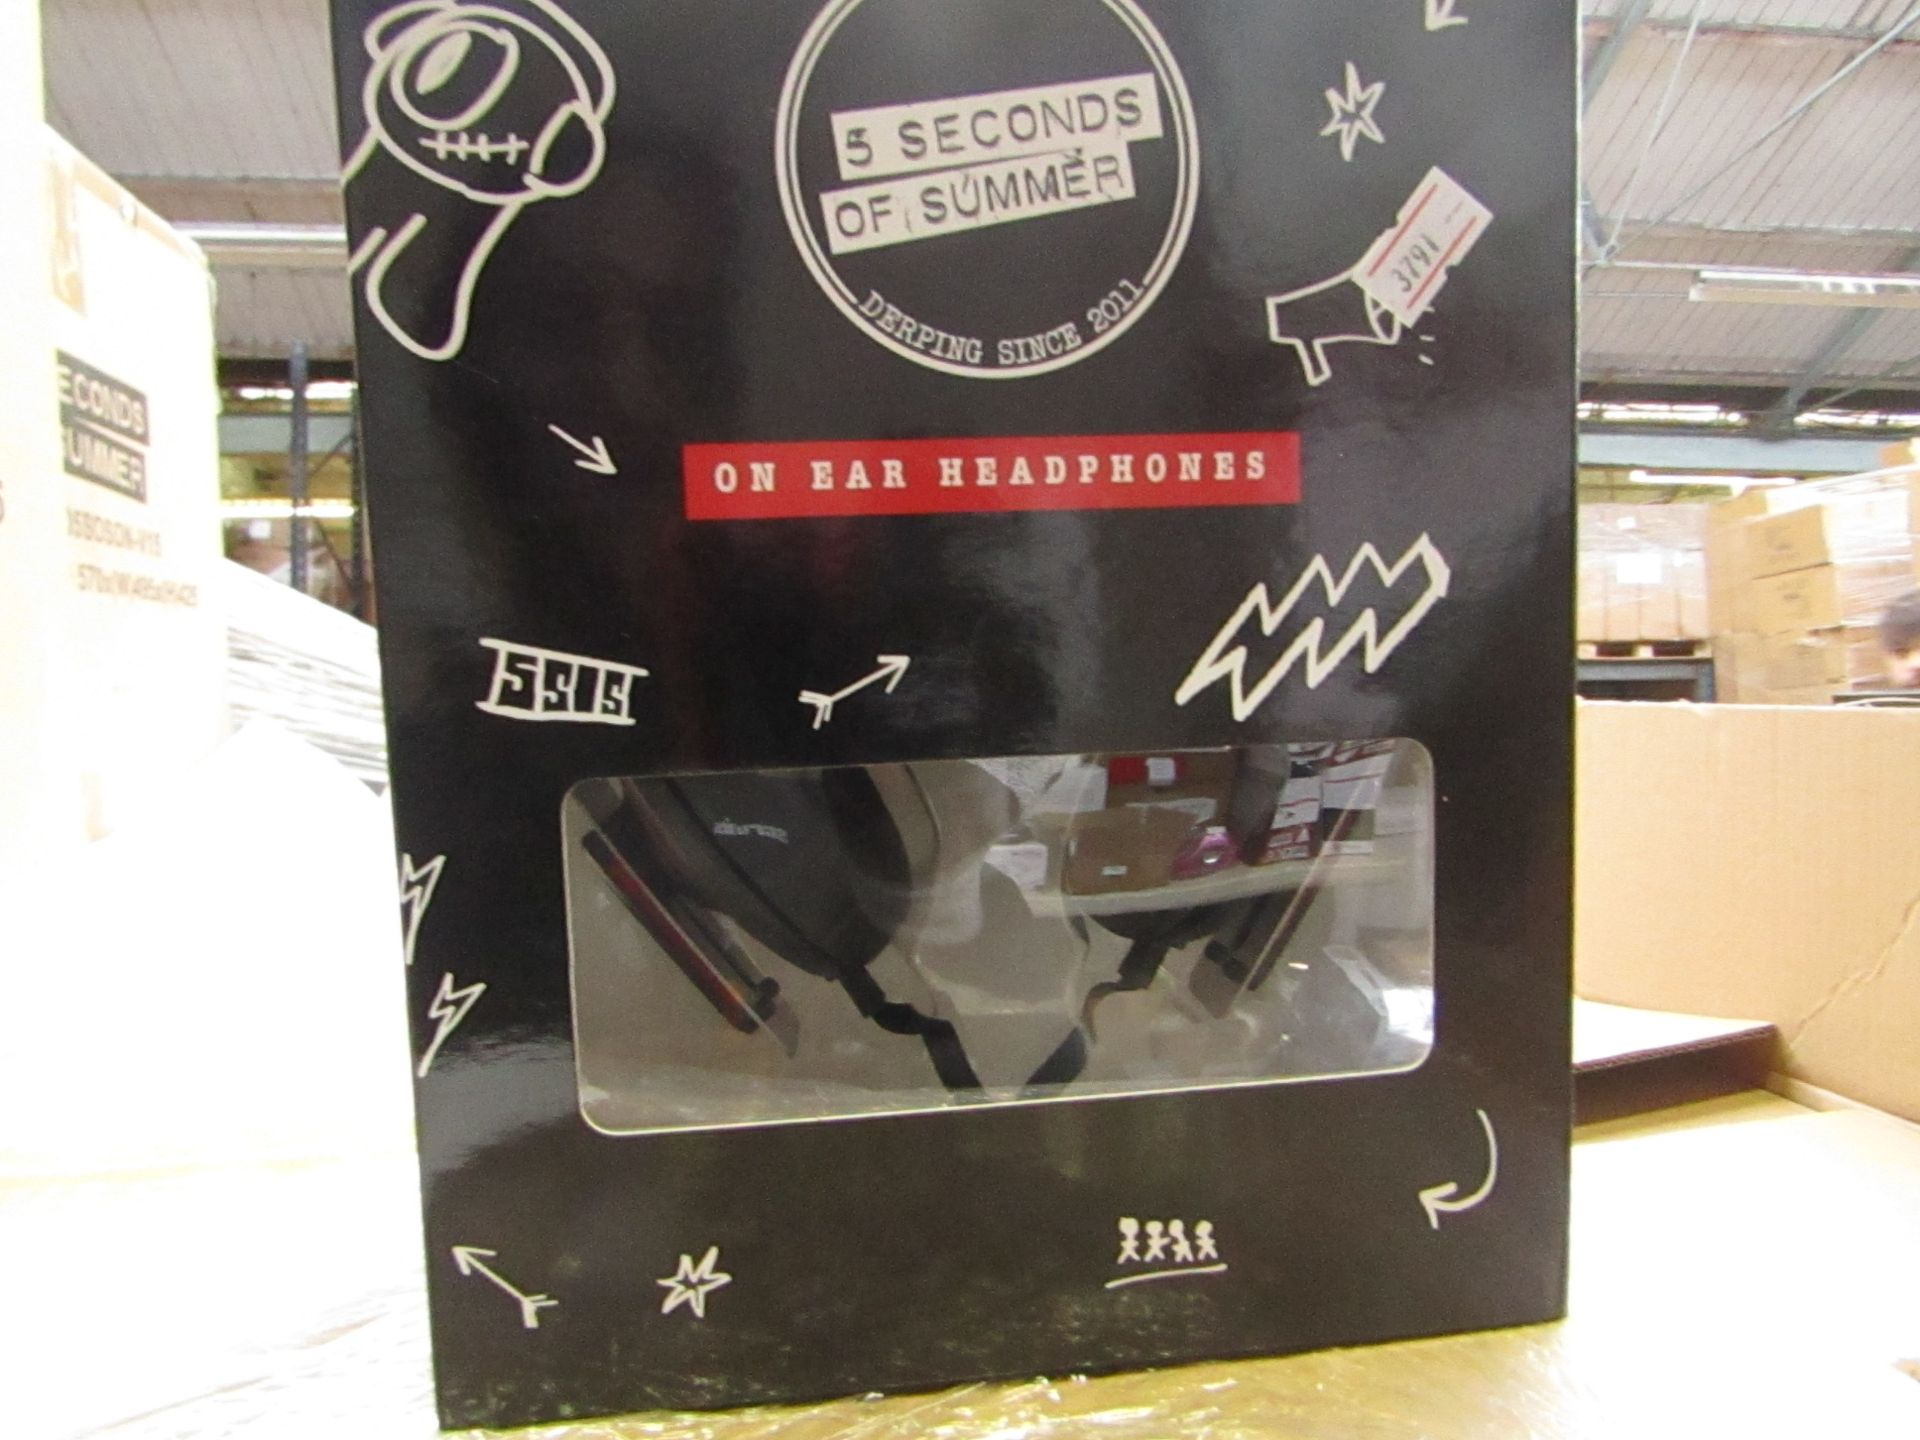 5x 5 Seconds of Summer headphones , new and boxed.